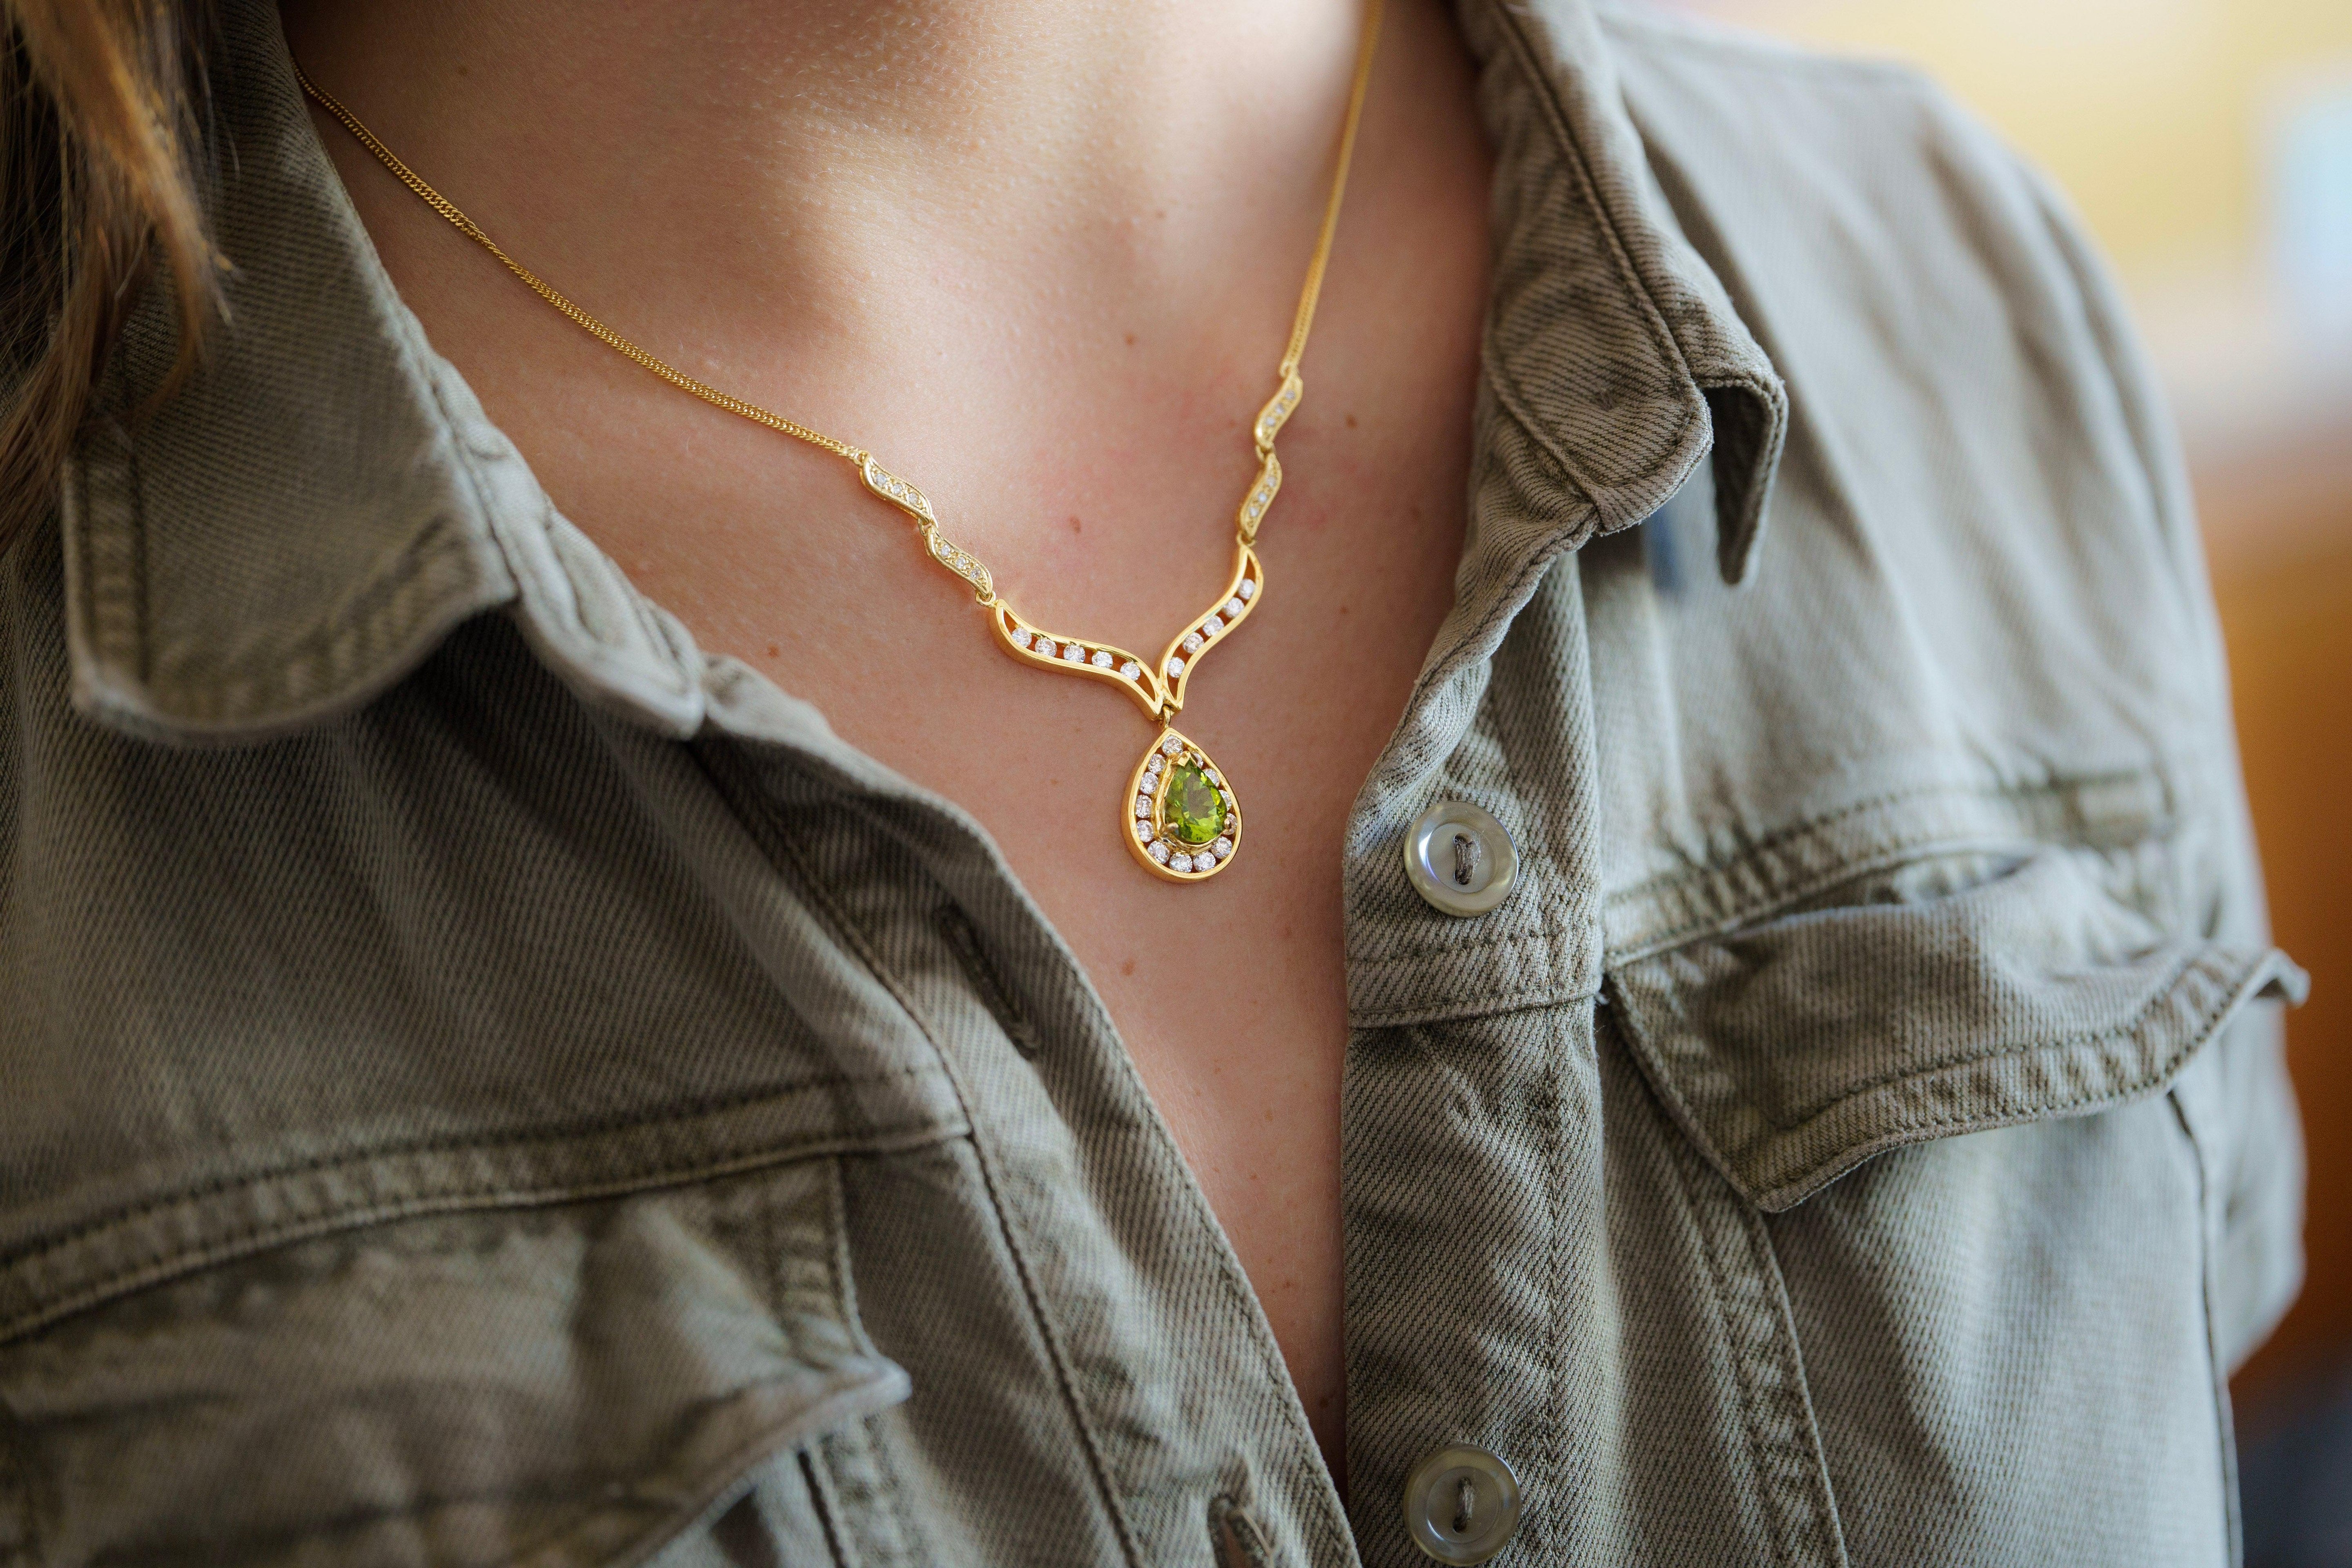 Vintage Pear Cut Green Peridot Drop Pendant Necklace with Diamonds in 18K Yellow Gold-Necklace-ASSAY